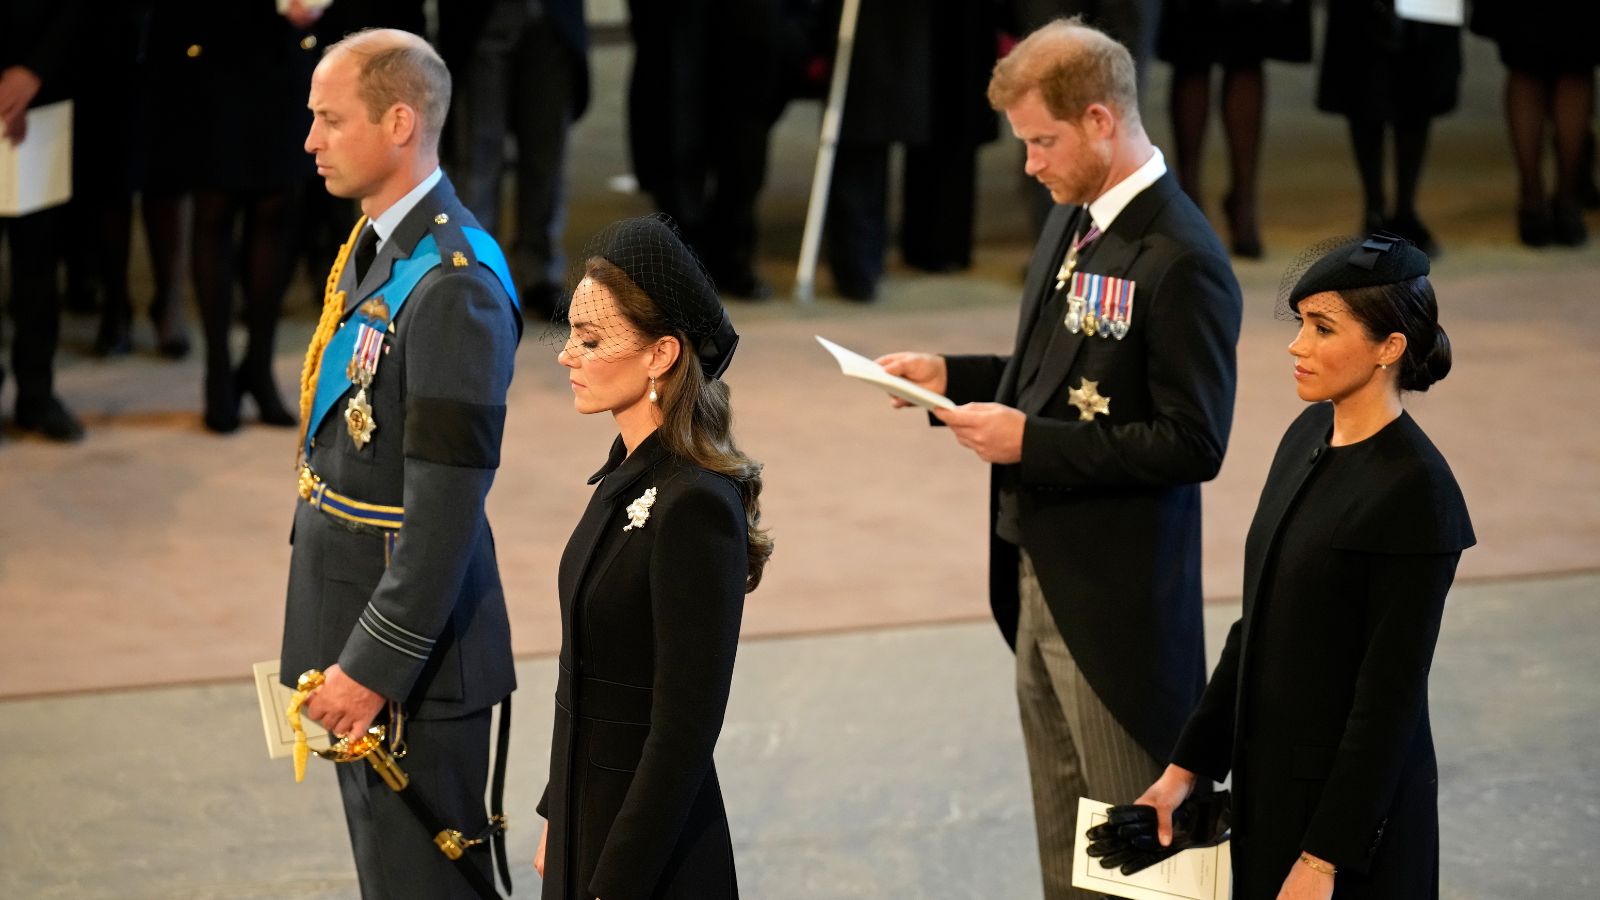 Kate Middleton and Prince William’s relationship in pictures the Queen's funeral